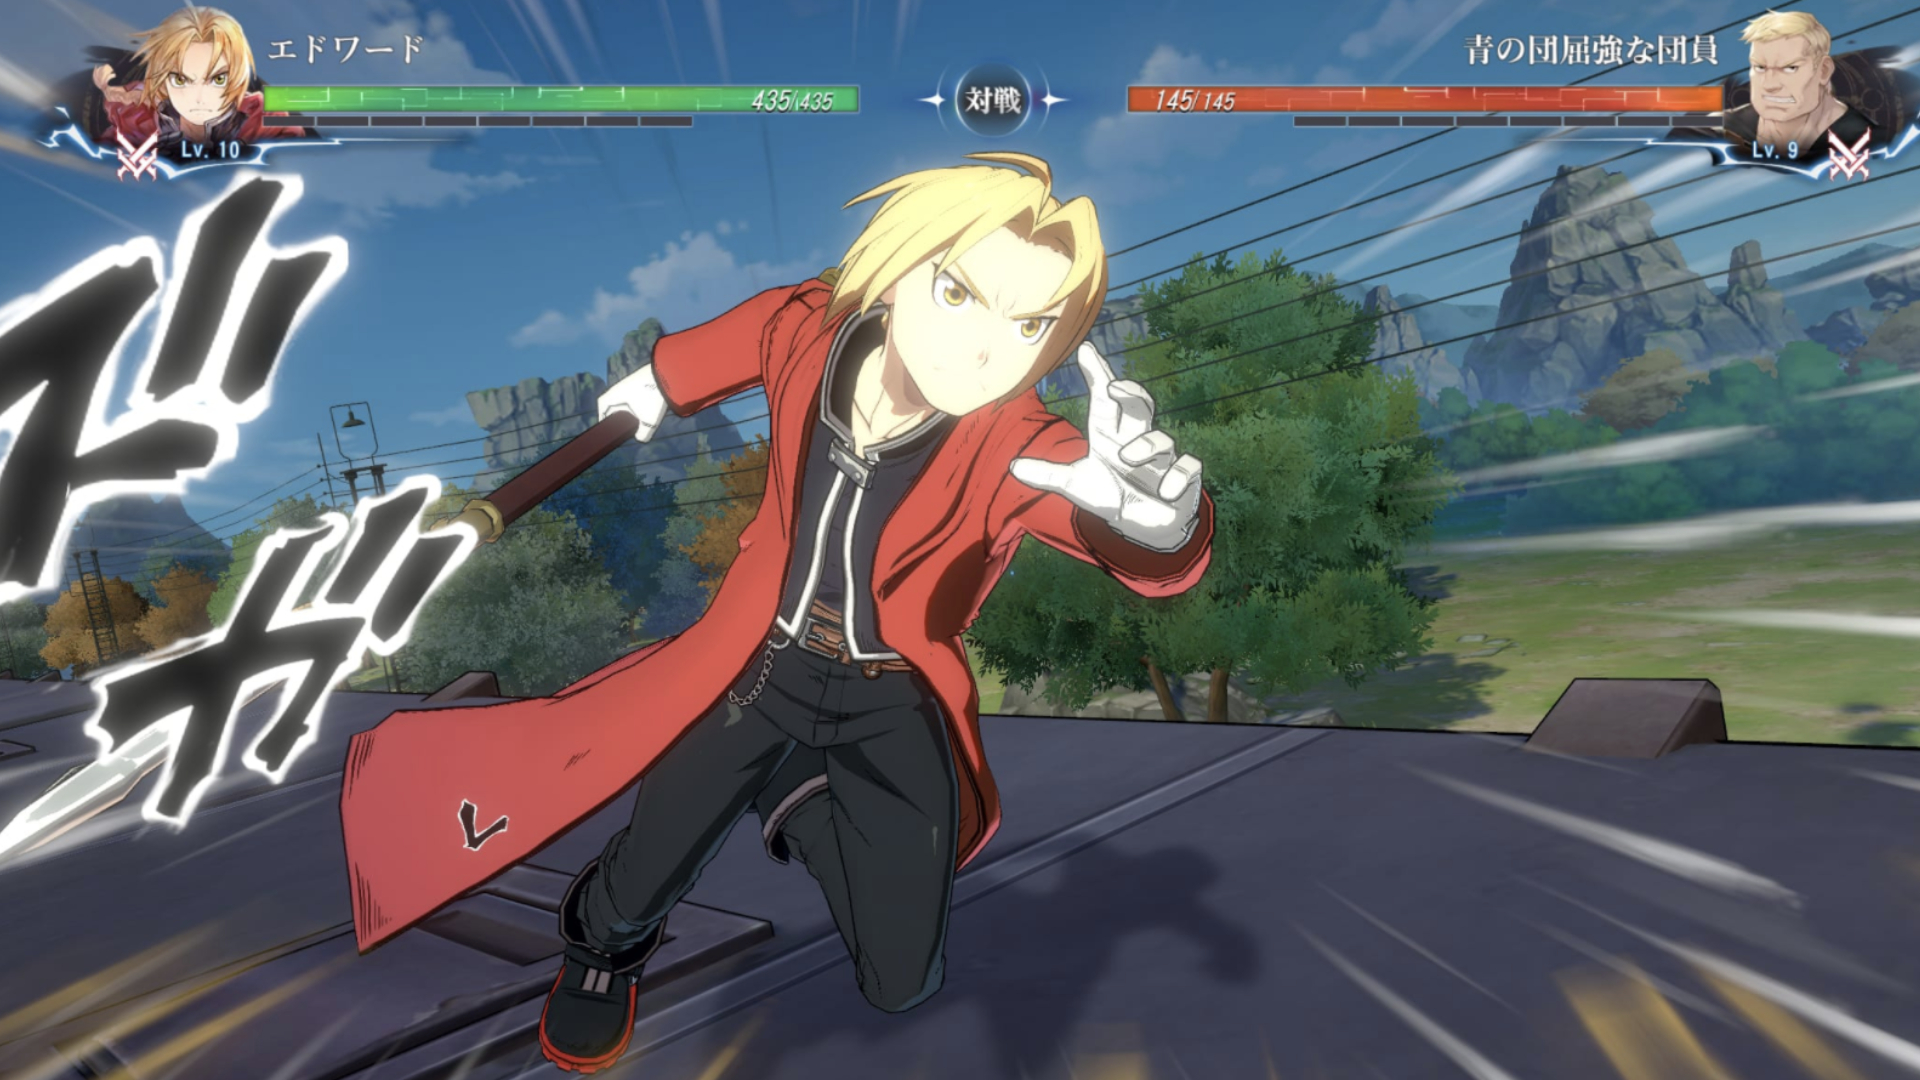 15 Best Anime Games to Play Right Now on Android and iOS